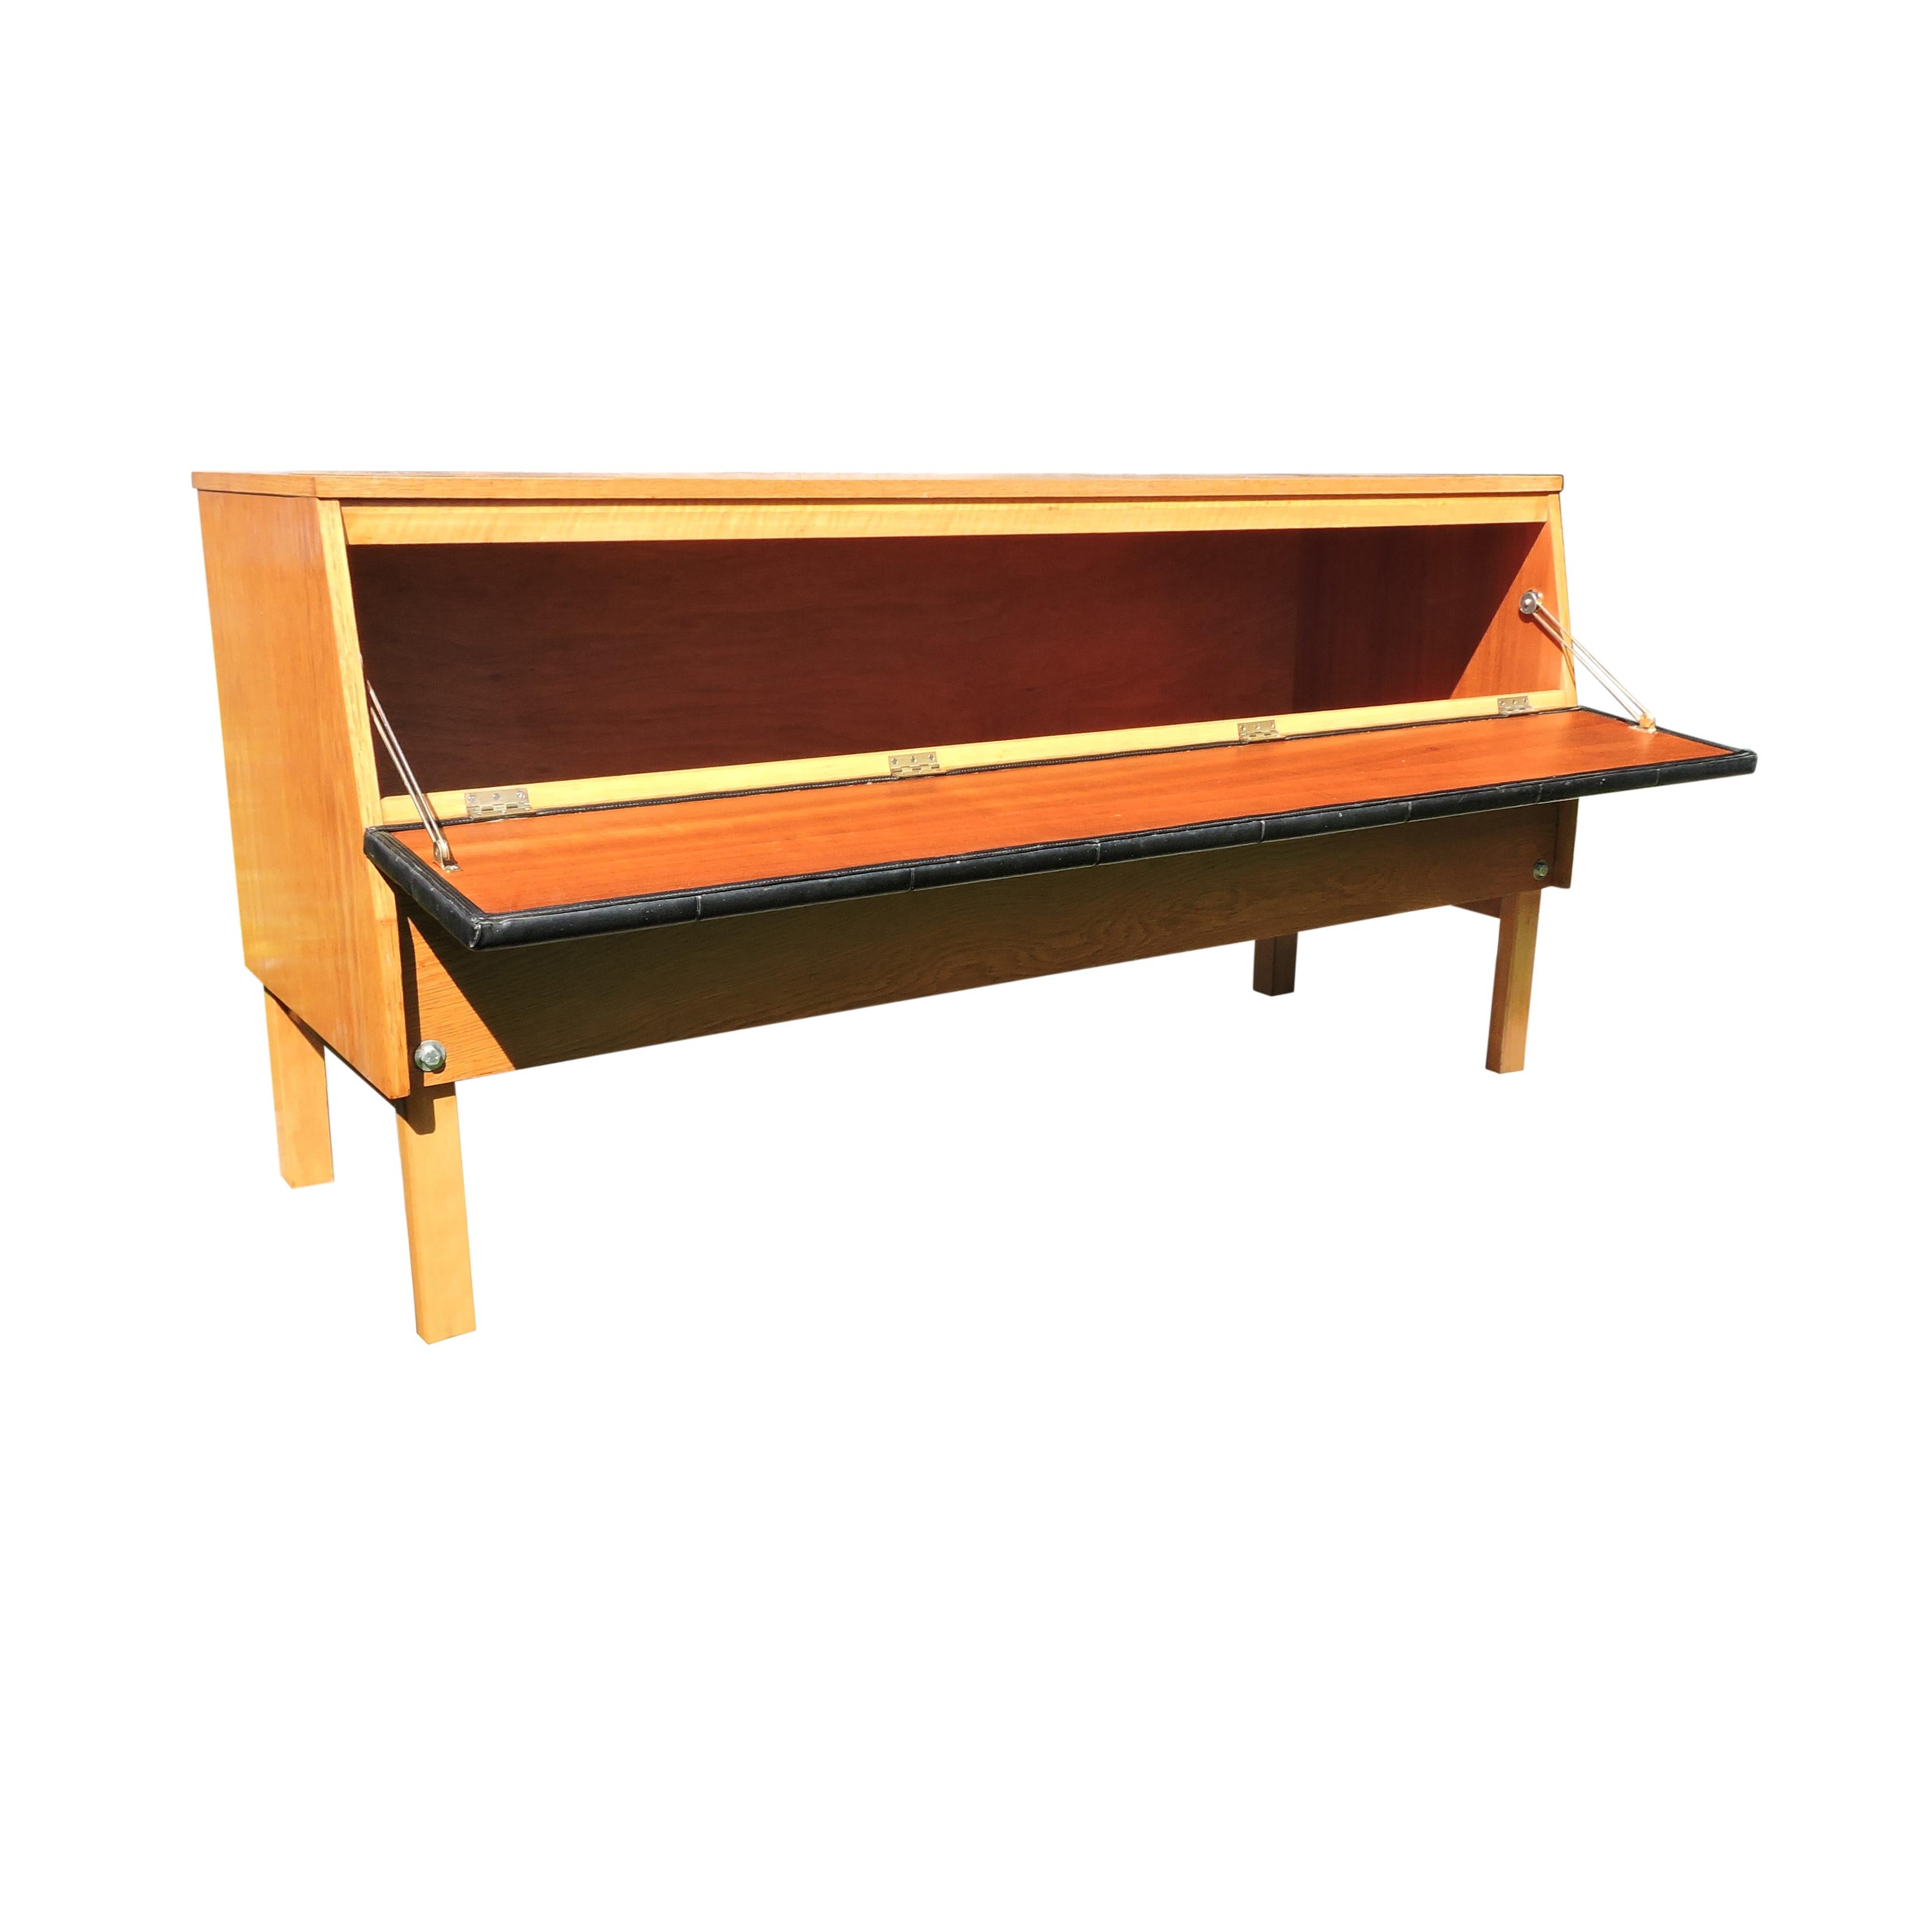 This G-Plan sideboard features a hinged upholstered drop front door leading to a hollow compartment for storage.
 